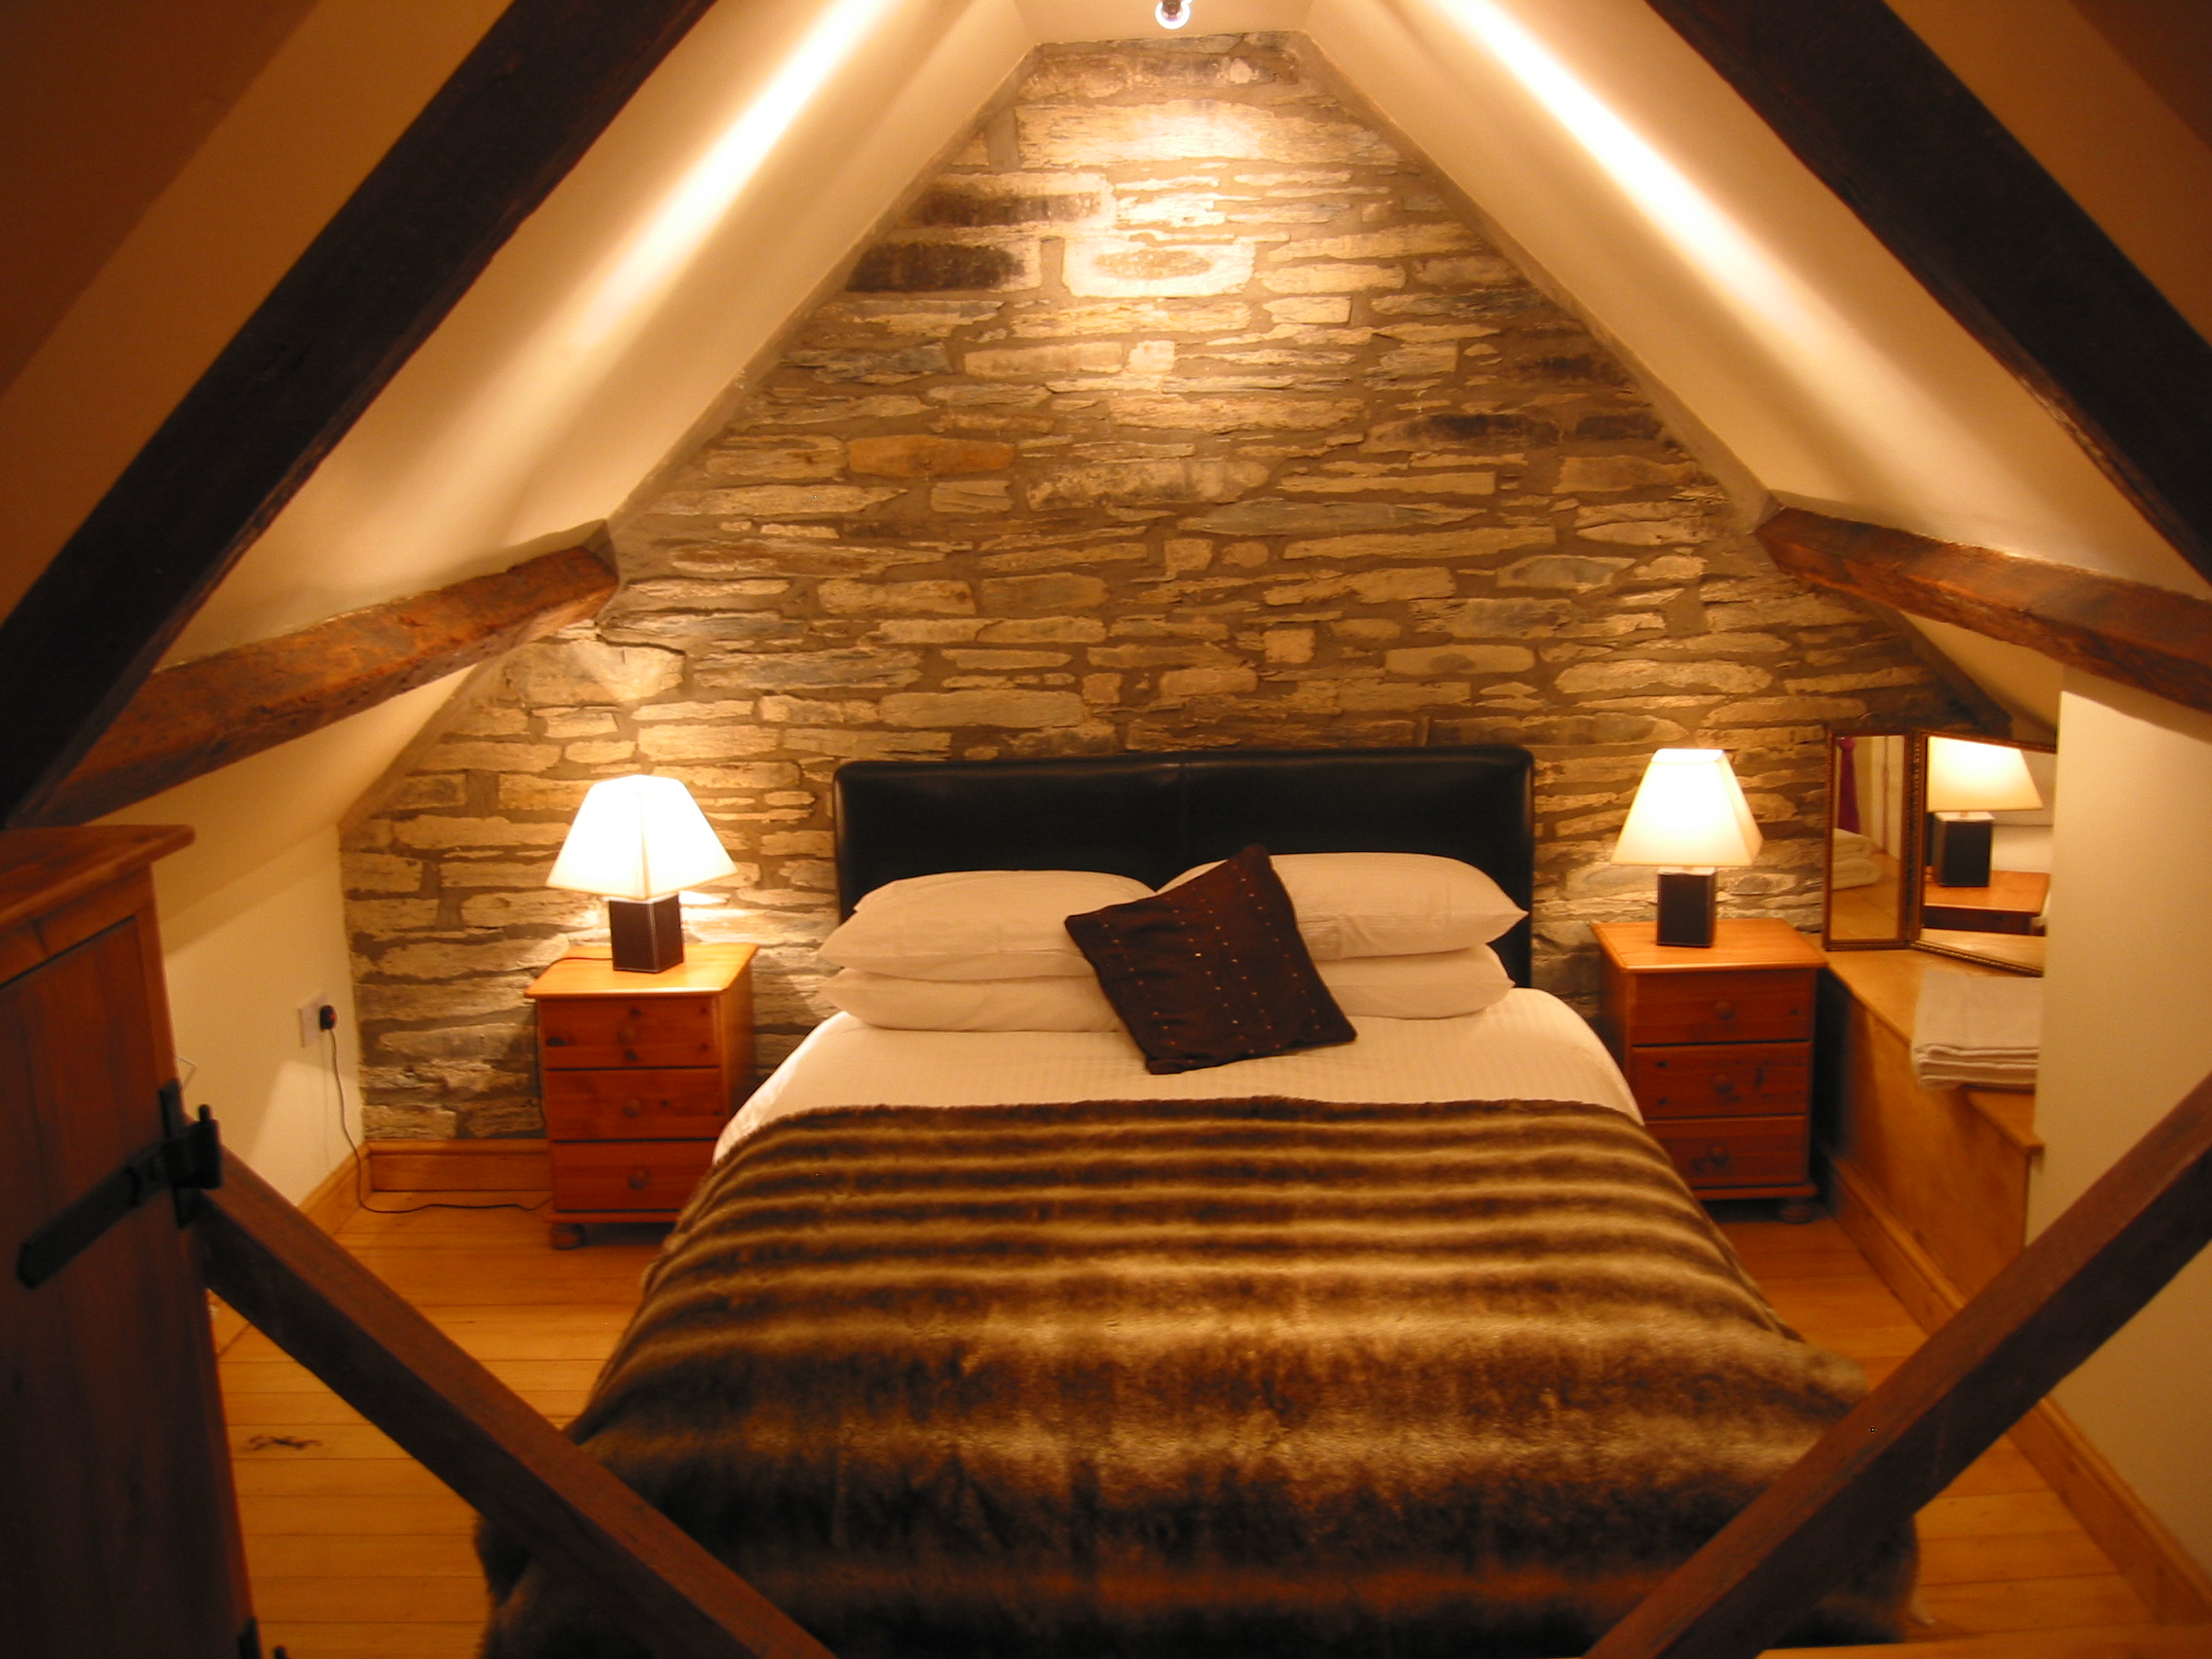 Attic Bedroom With Cozy Lighting Ceiling And Bed - Decobizz.com